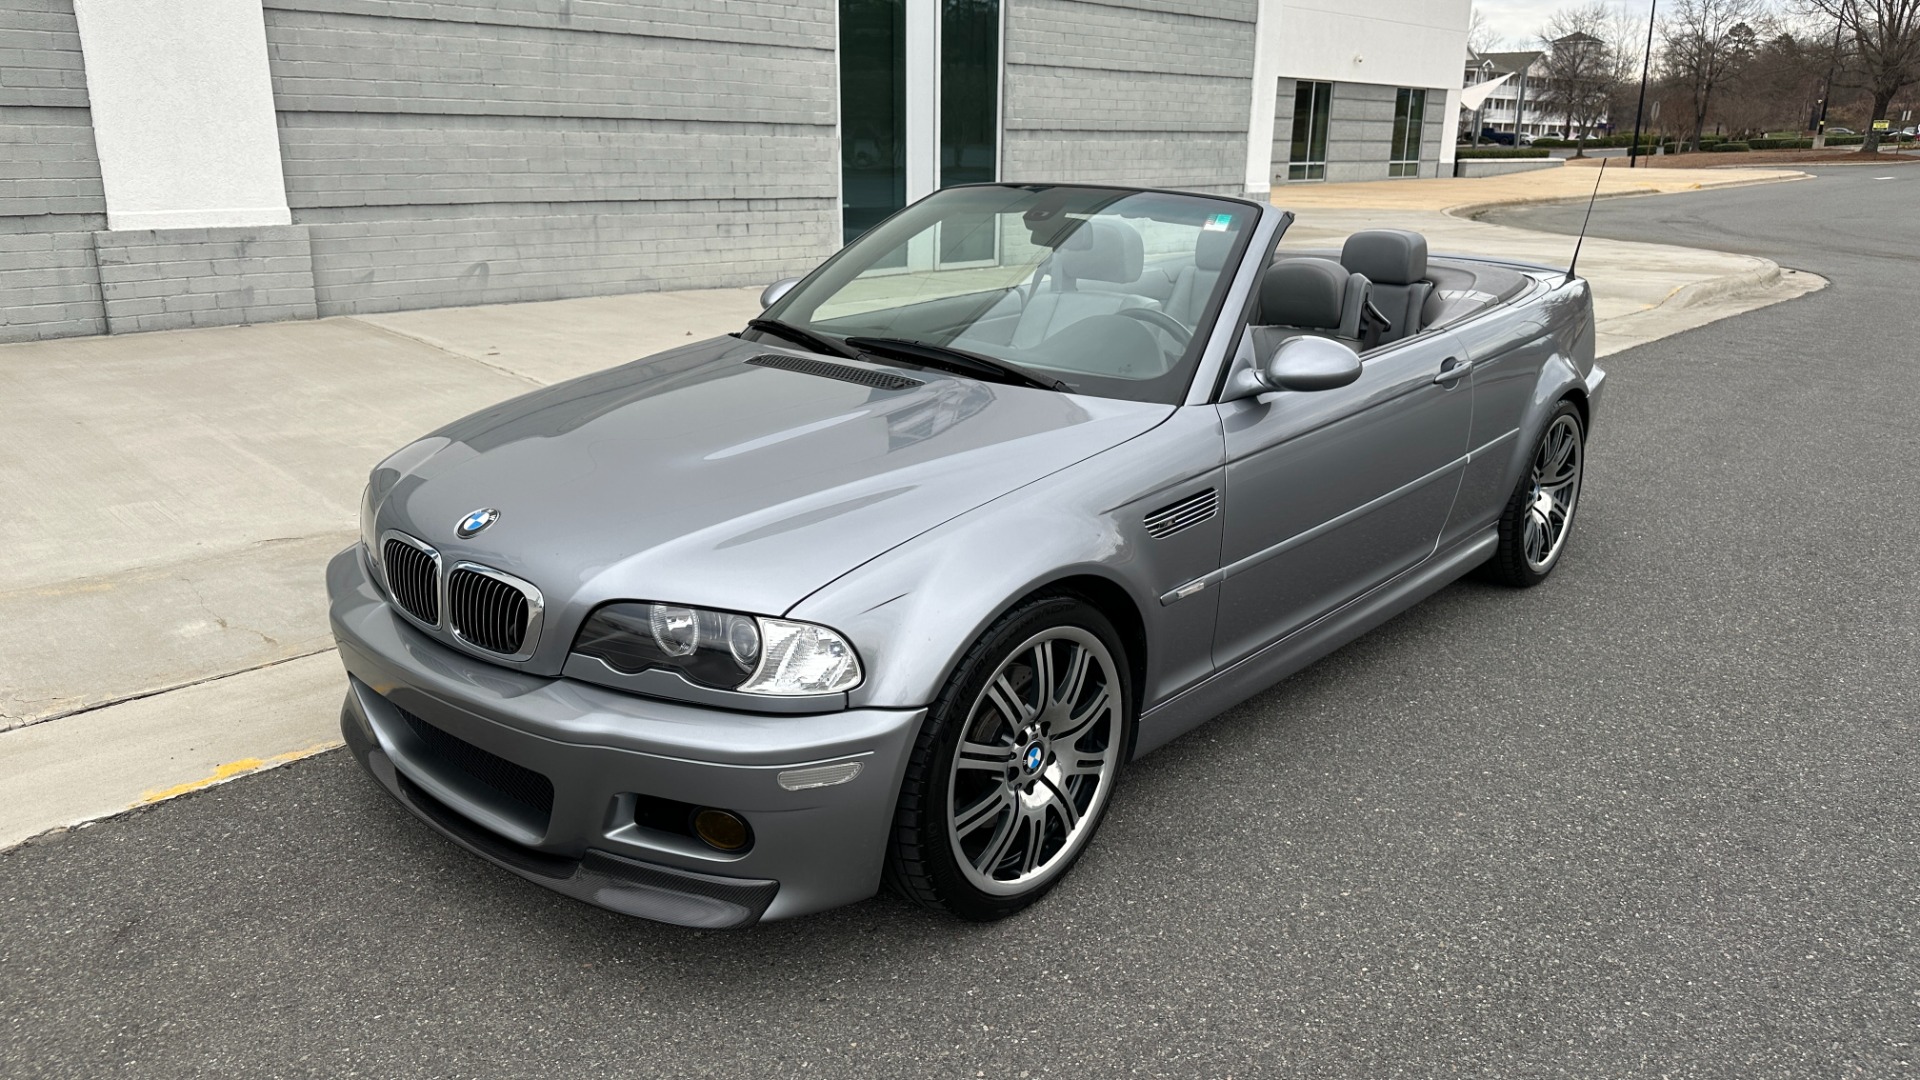 Used 2006 BMW M3 CONVERTIBLE / SMG AUTO / LEATHER / INLINE 6CYL / CARBON FIBER for sale $26,995 at Formula Imports in Charlotte NC 28227 5